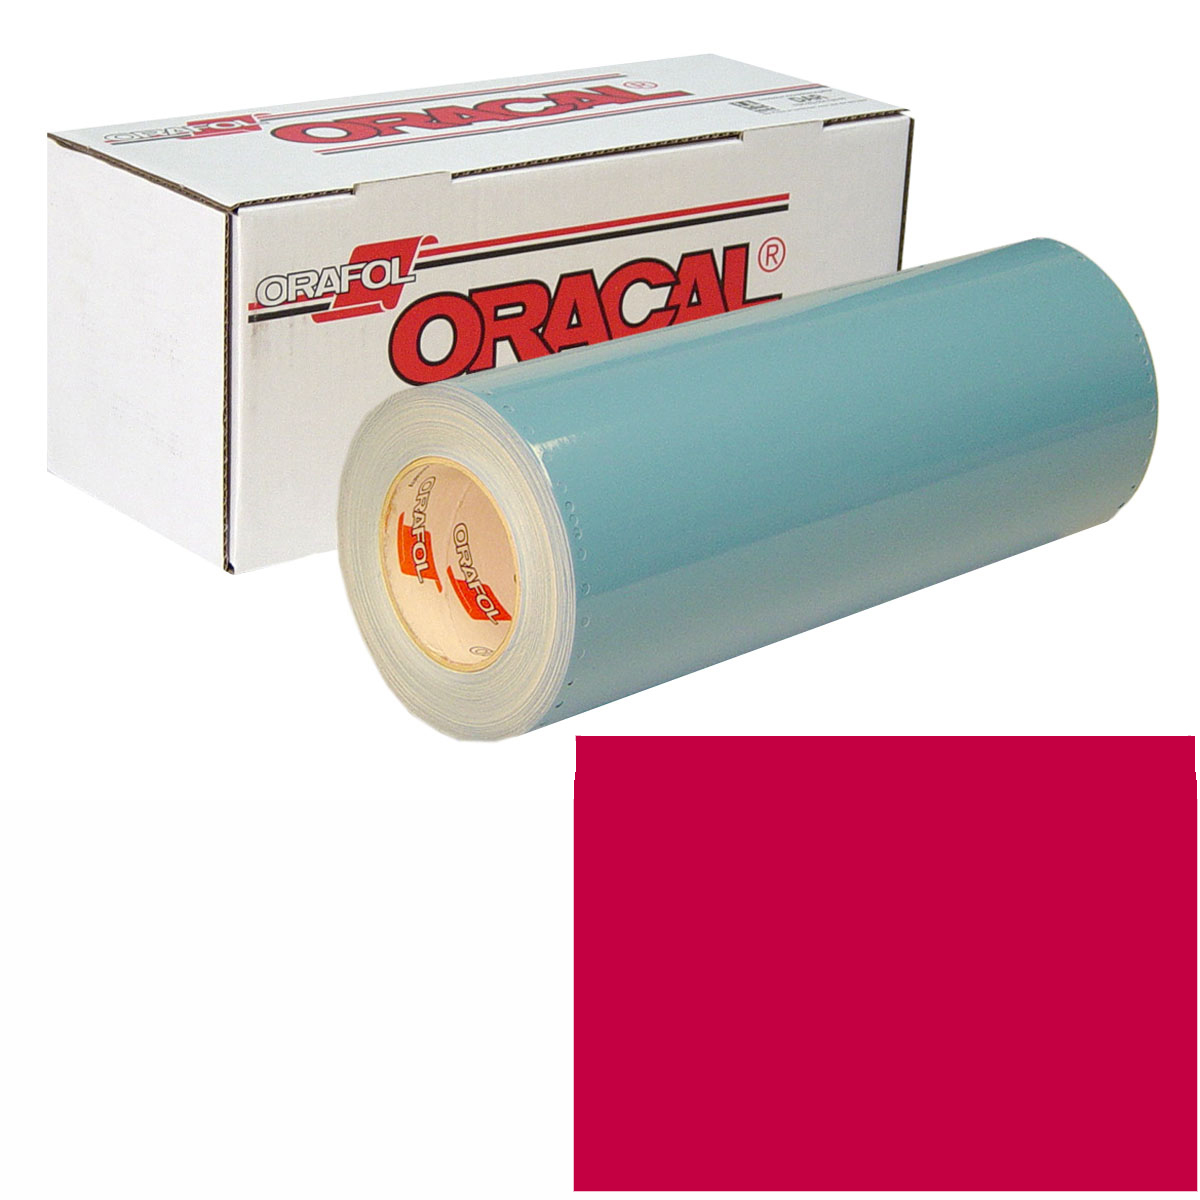 ORACAL 751RA 48in X 50yd 031 Red